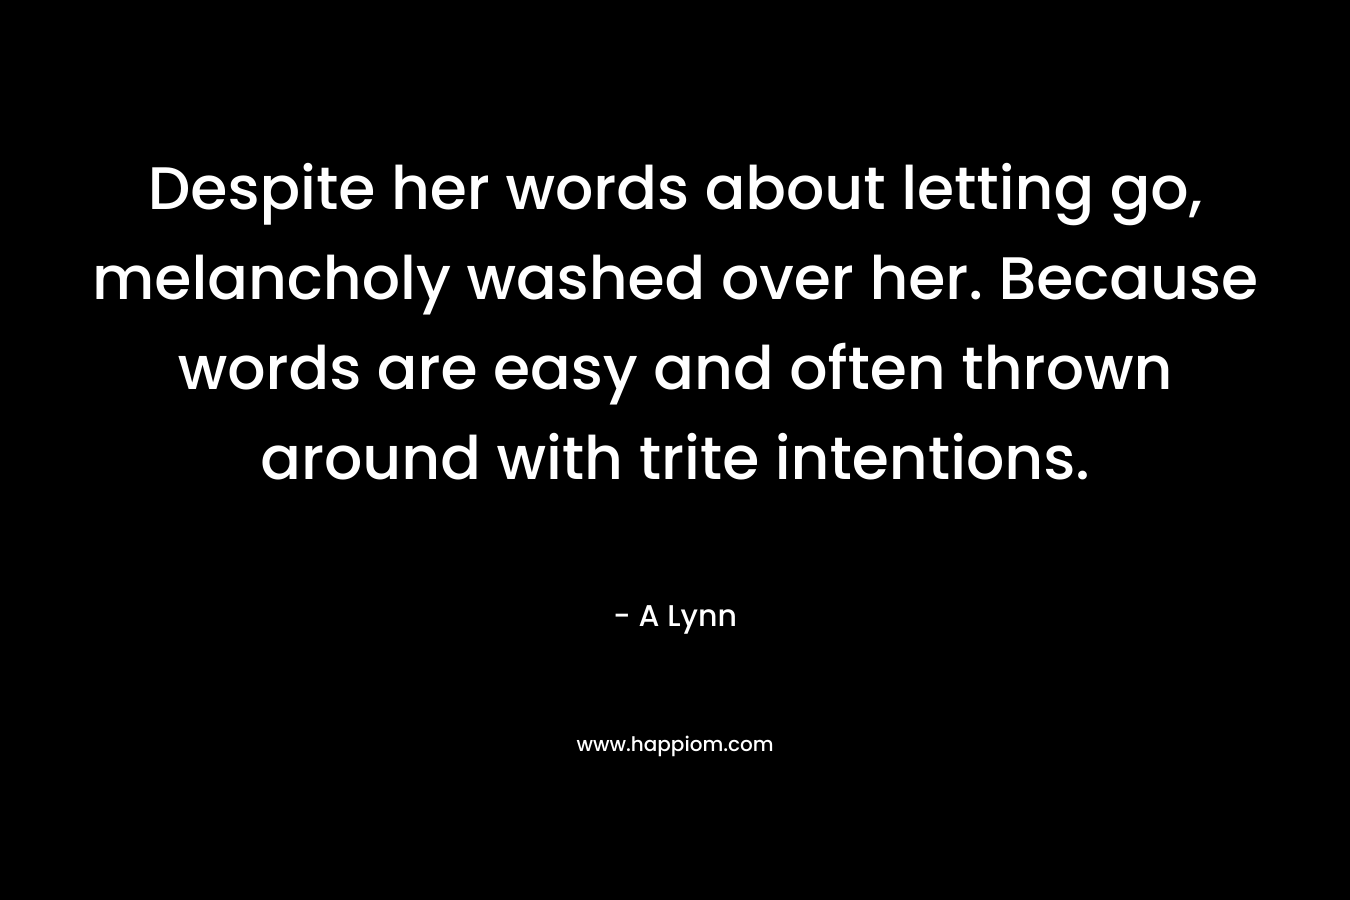 Despite her words about letting go, melancholy washed over her. Because words are easy and often thrown around with trite intentions.